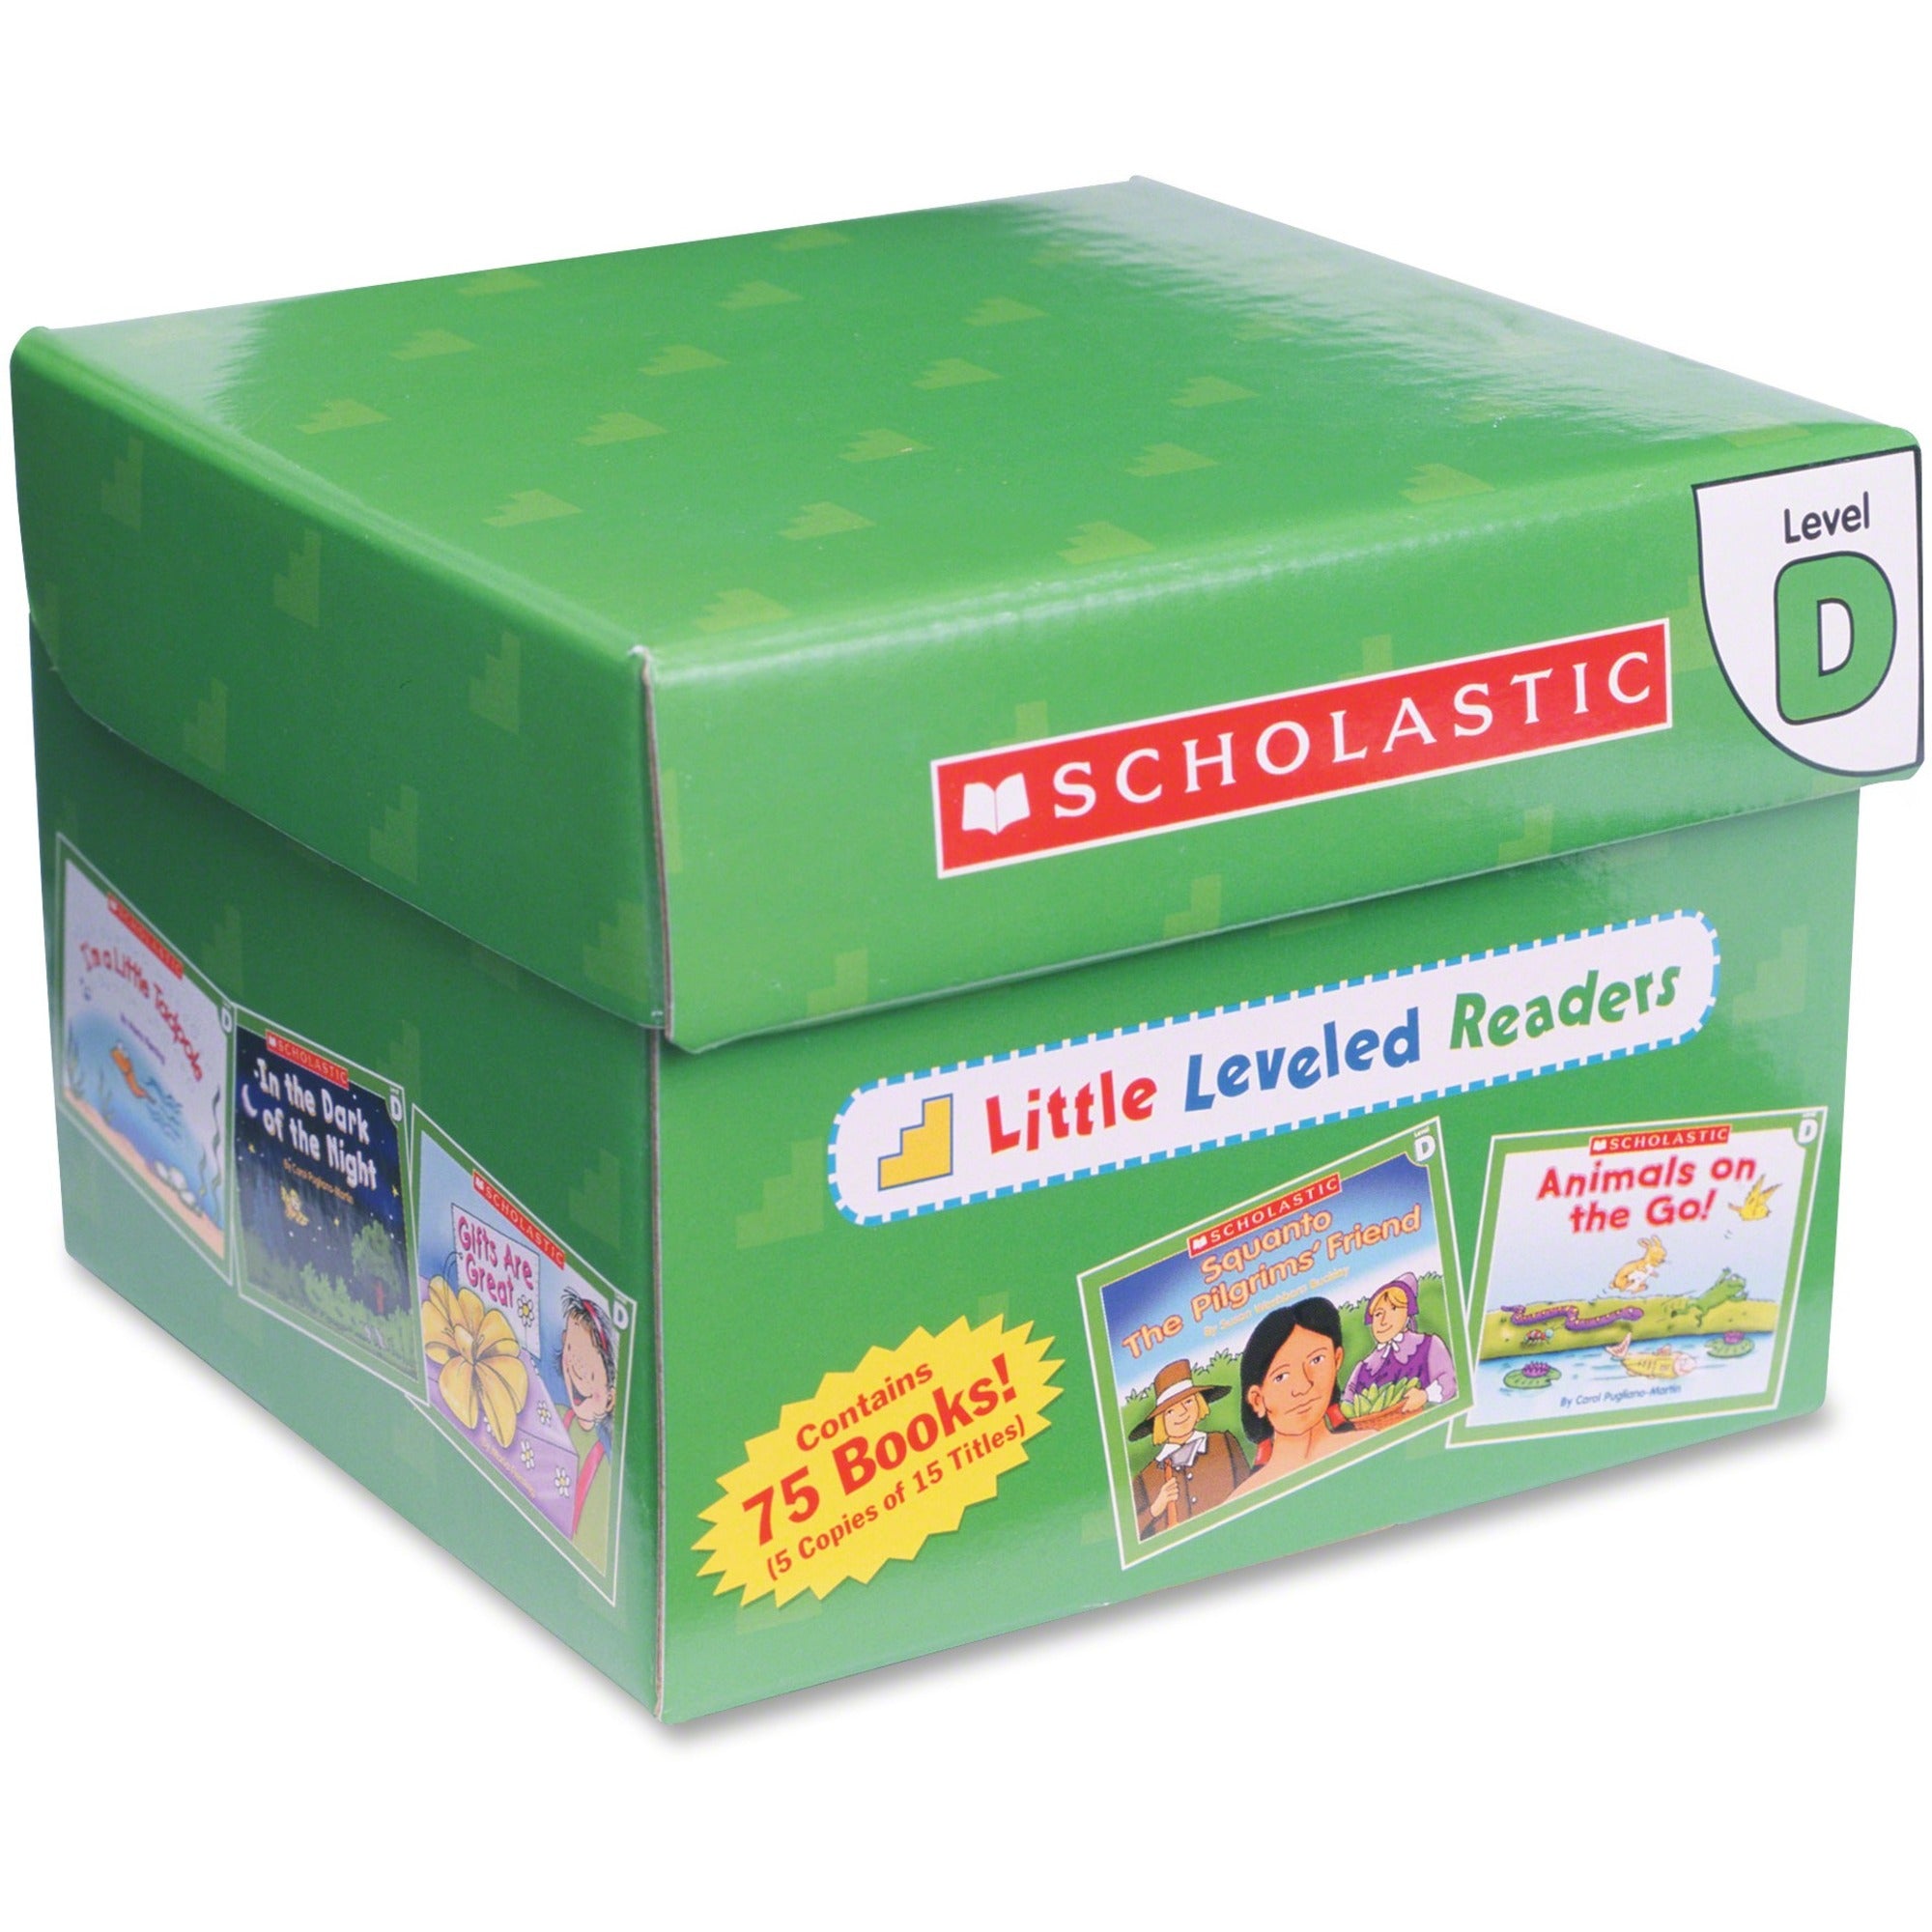 Scholastic Little Leveled Readers Level D Printed Book Box Set Printed Book - Scholastic Teaching Resources Publication - 2003 - Softcover - Grade K-2 - 